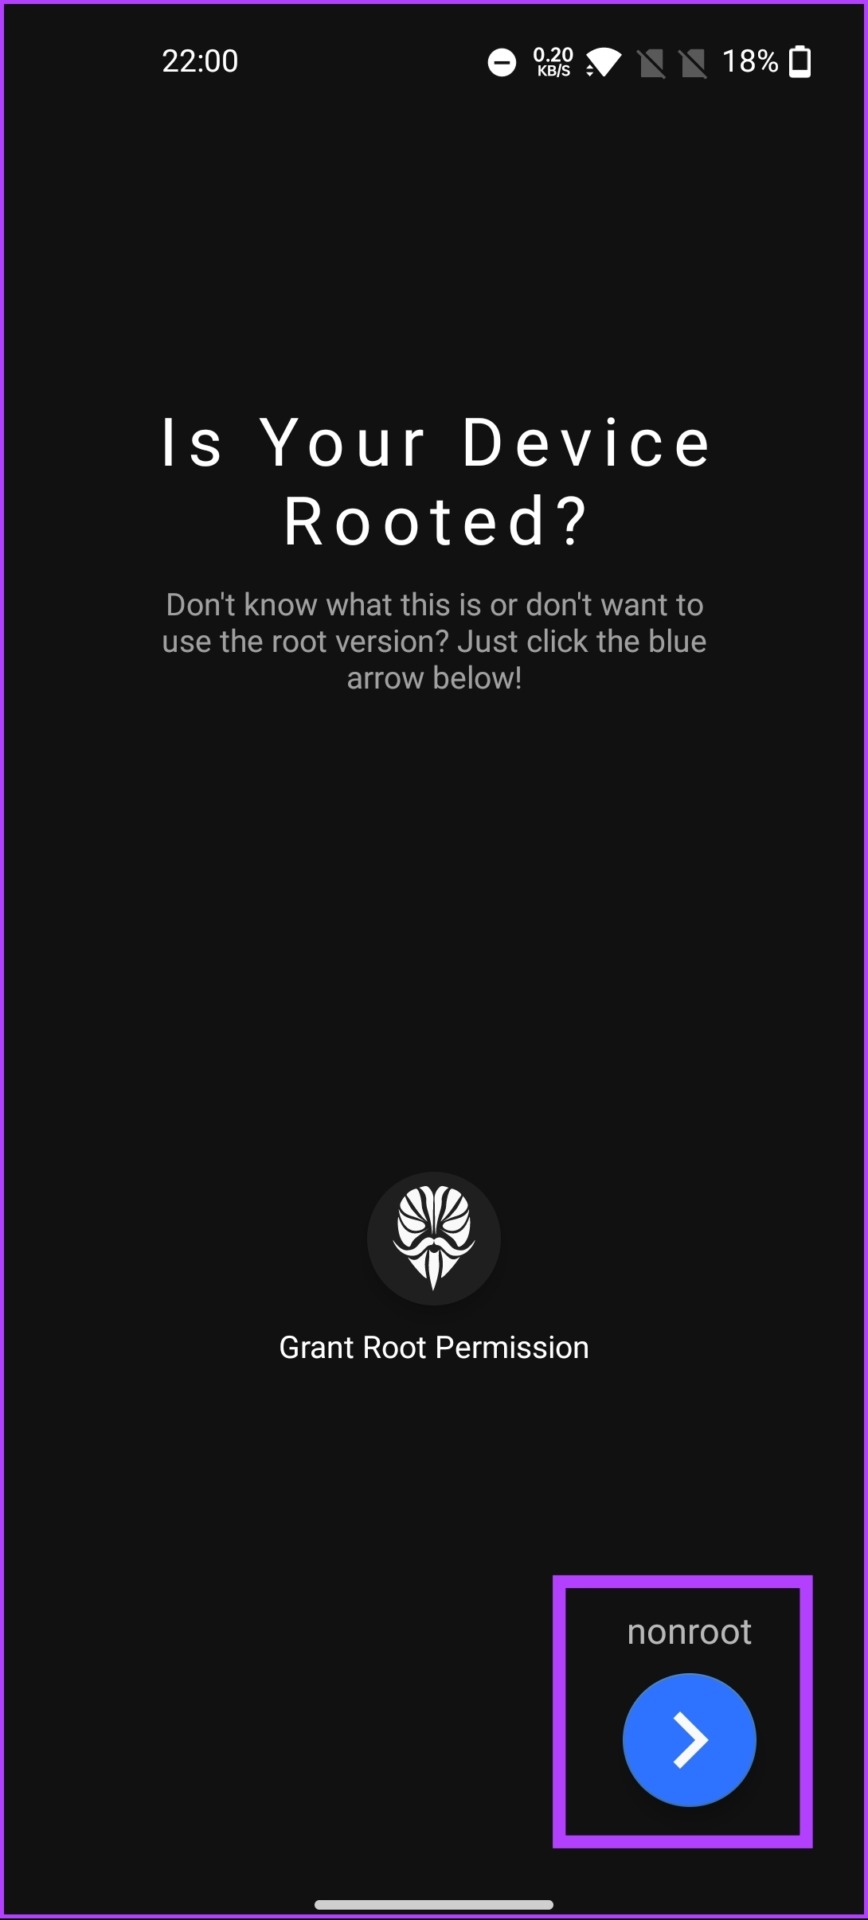 tap on Grant Root Permission